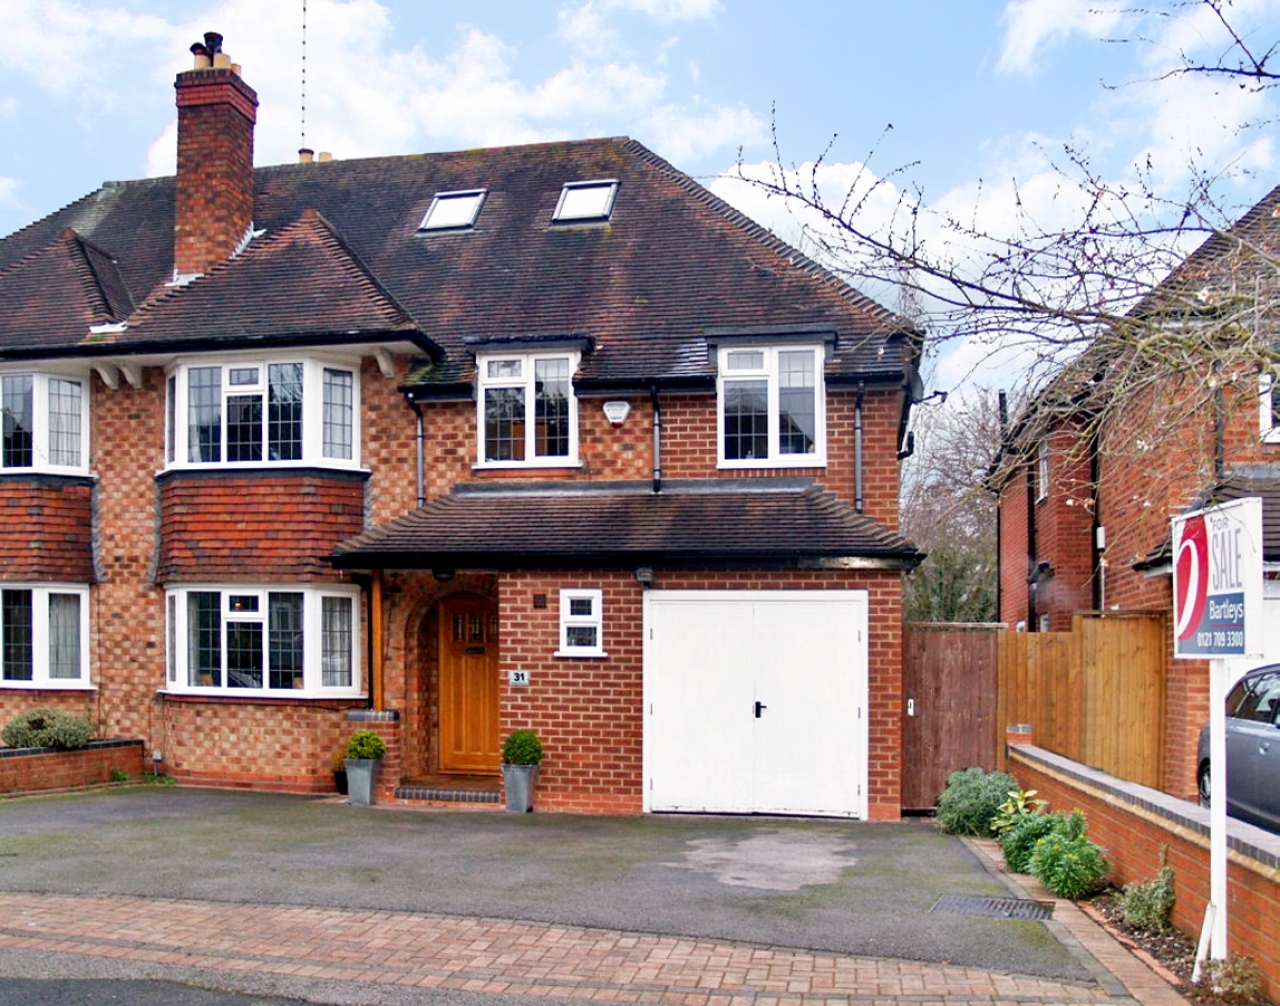 5 bedroom semi detached house SSTC in Solihull - Main Image.